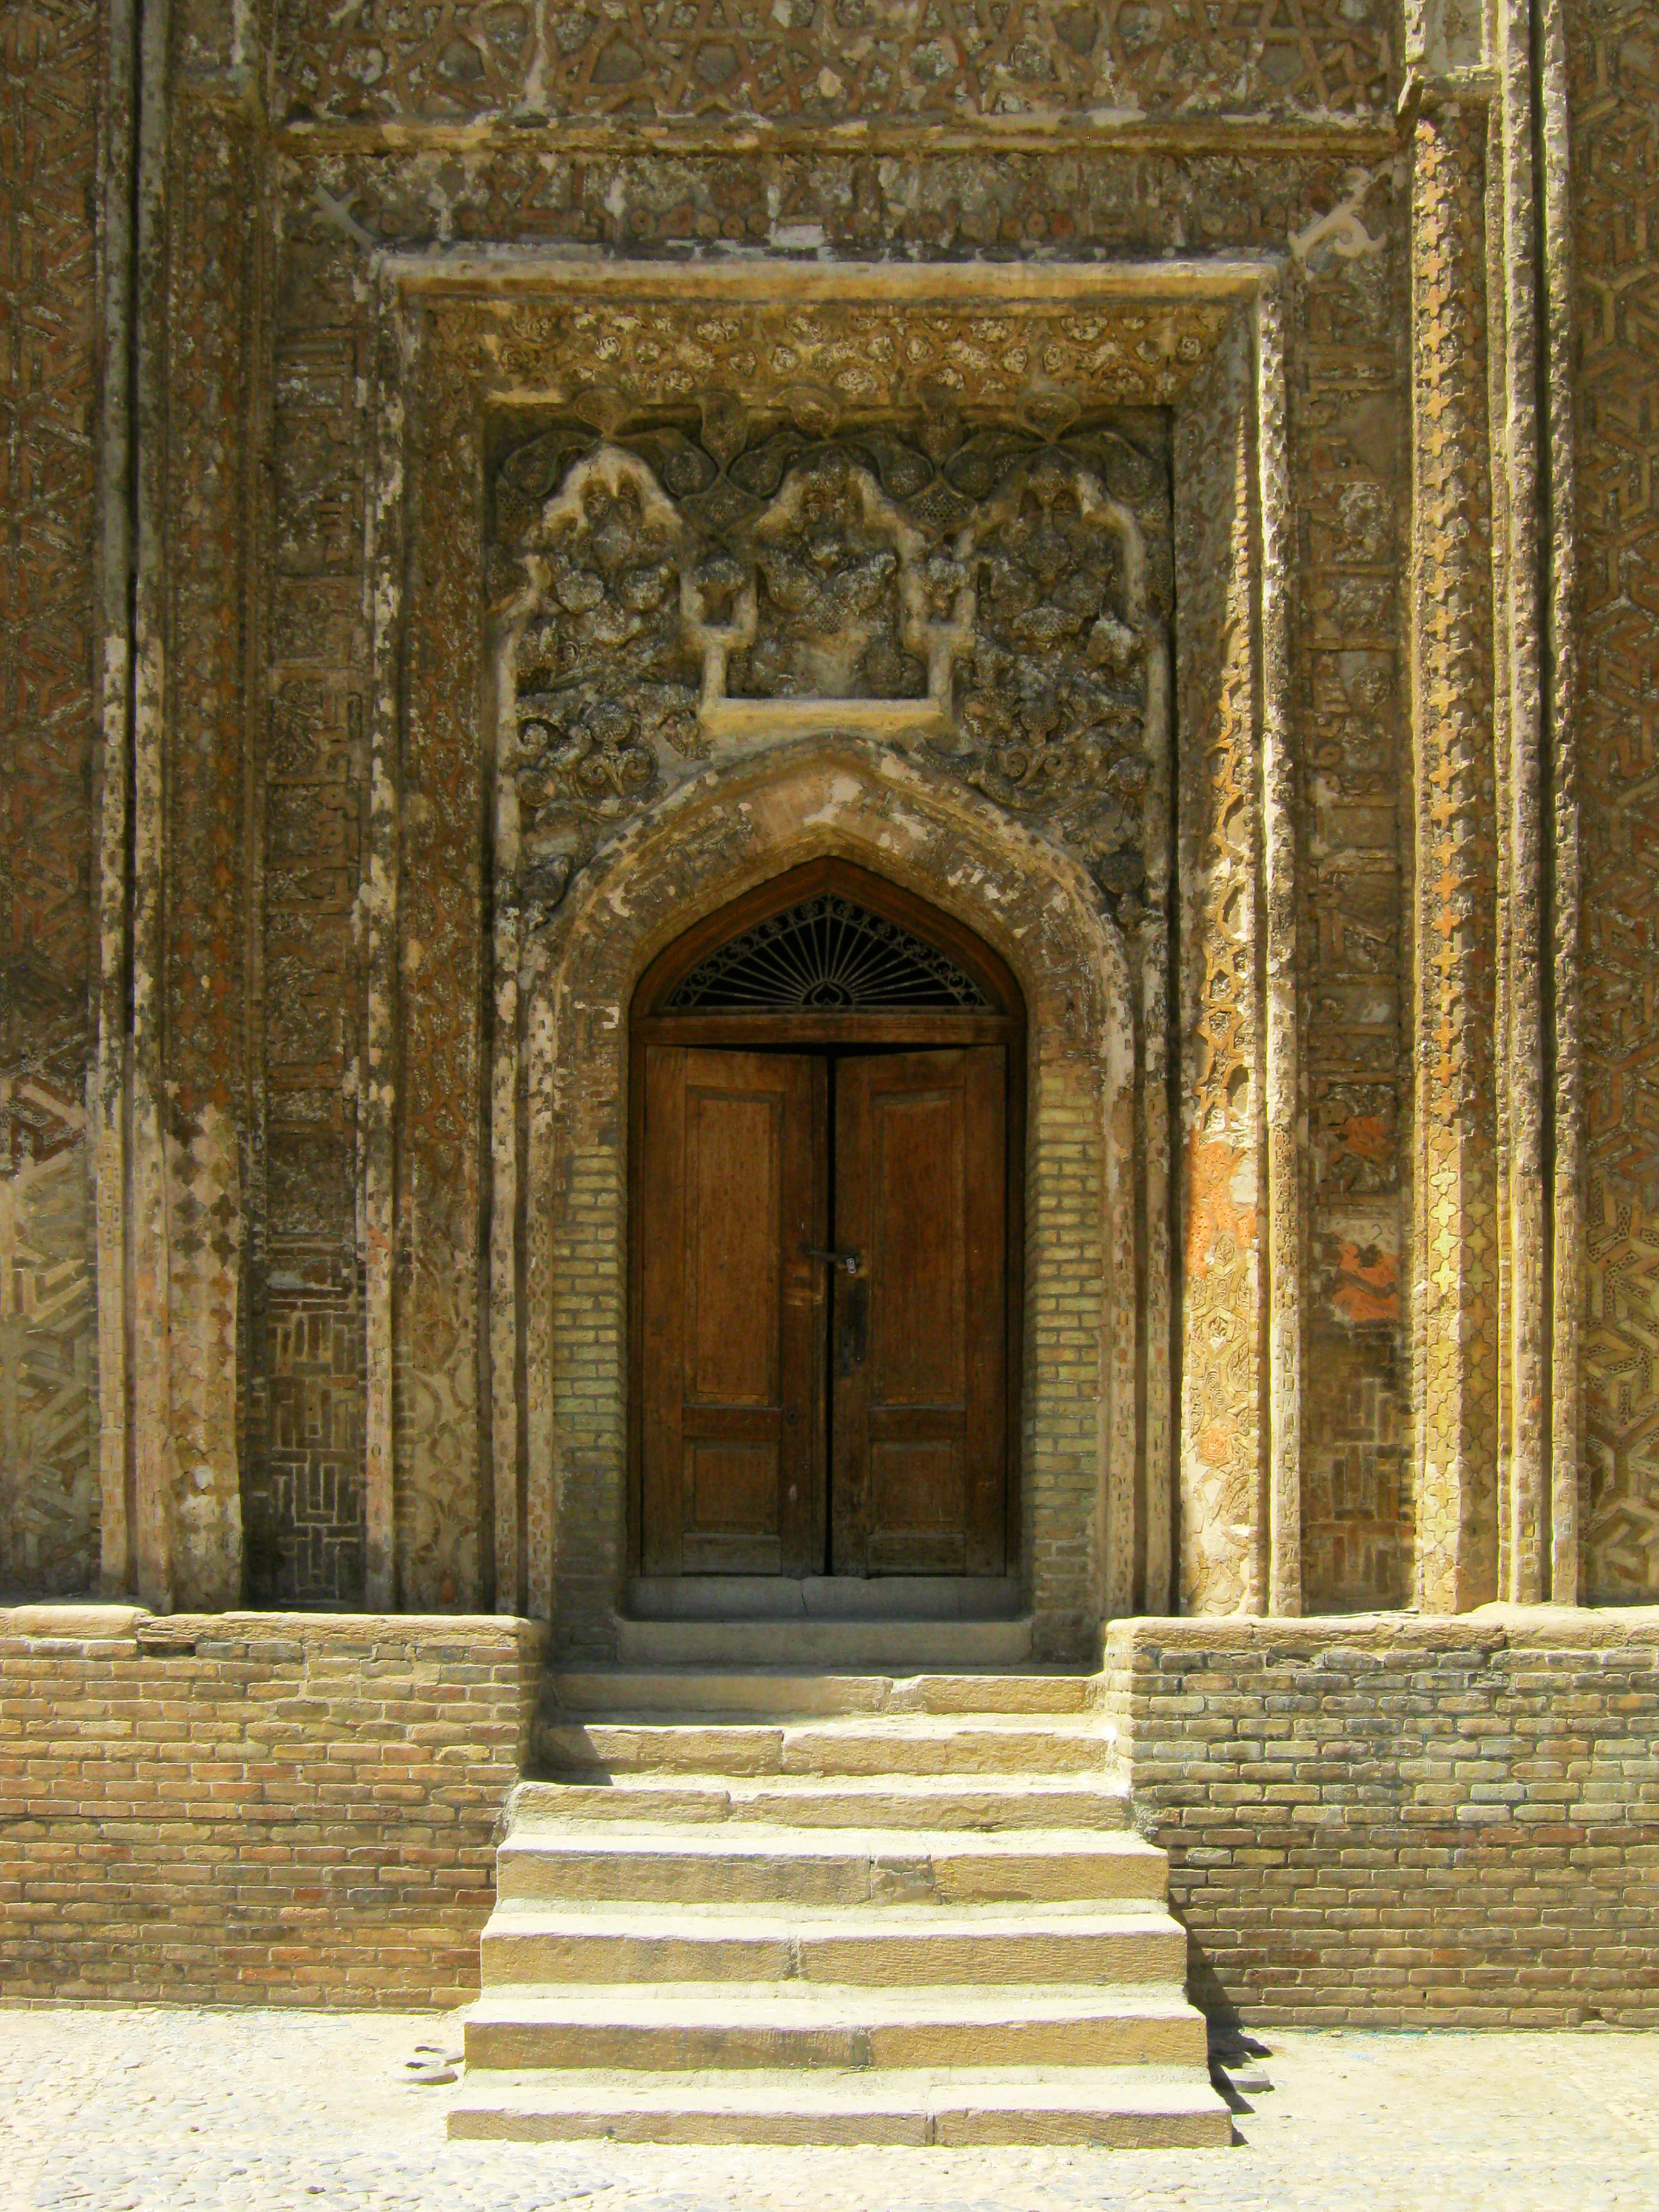 The Entrance of Alavian Tomb 